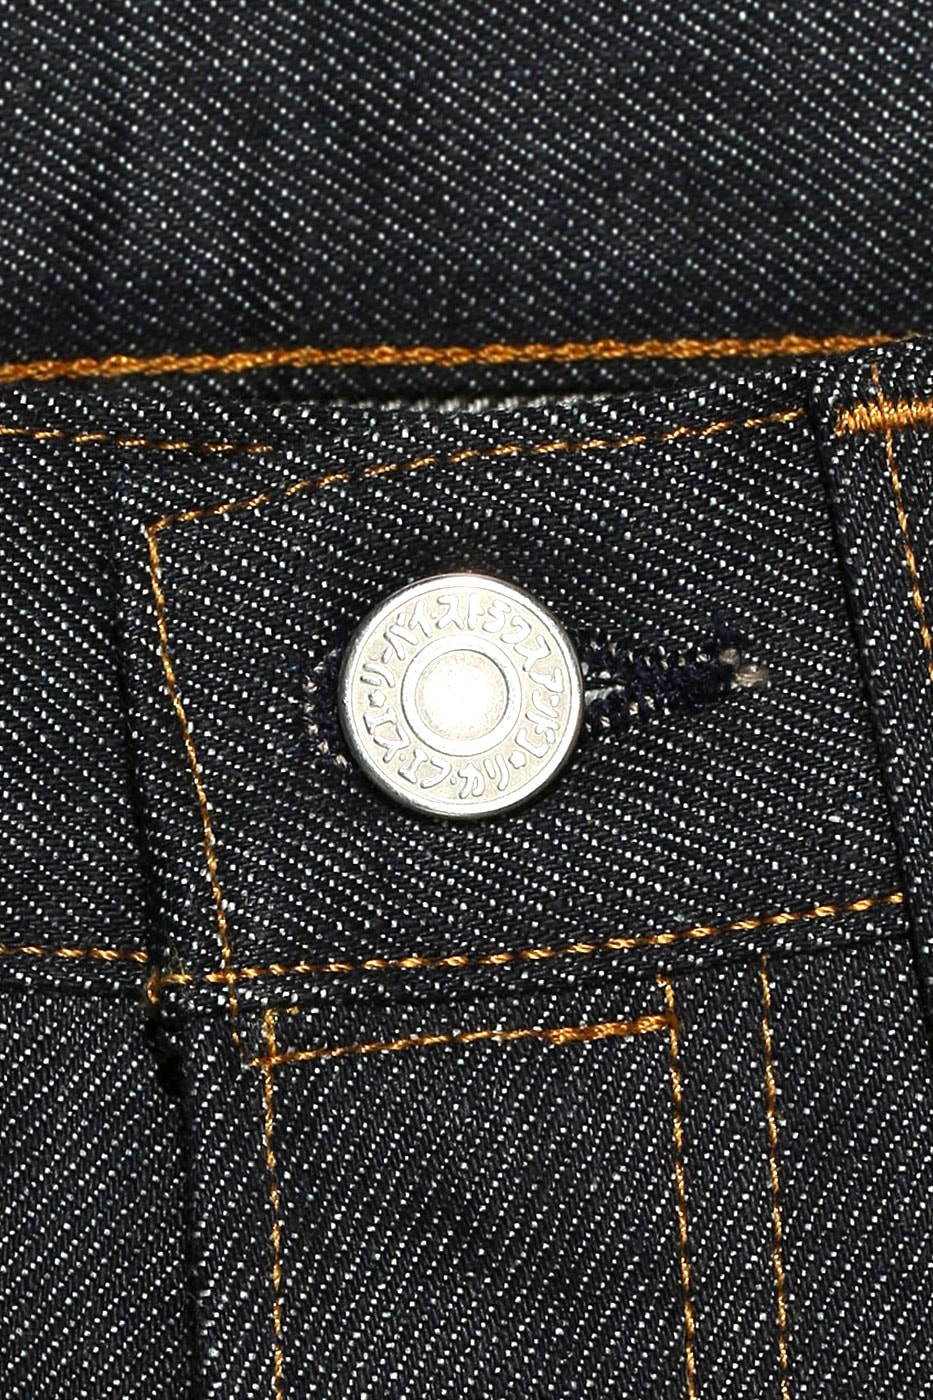 Levi's® Vintage Clothing Limited-Edition Japanese 501 Jeans fabric tags button text high waist line slim workwear selvedge denim red release info news